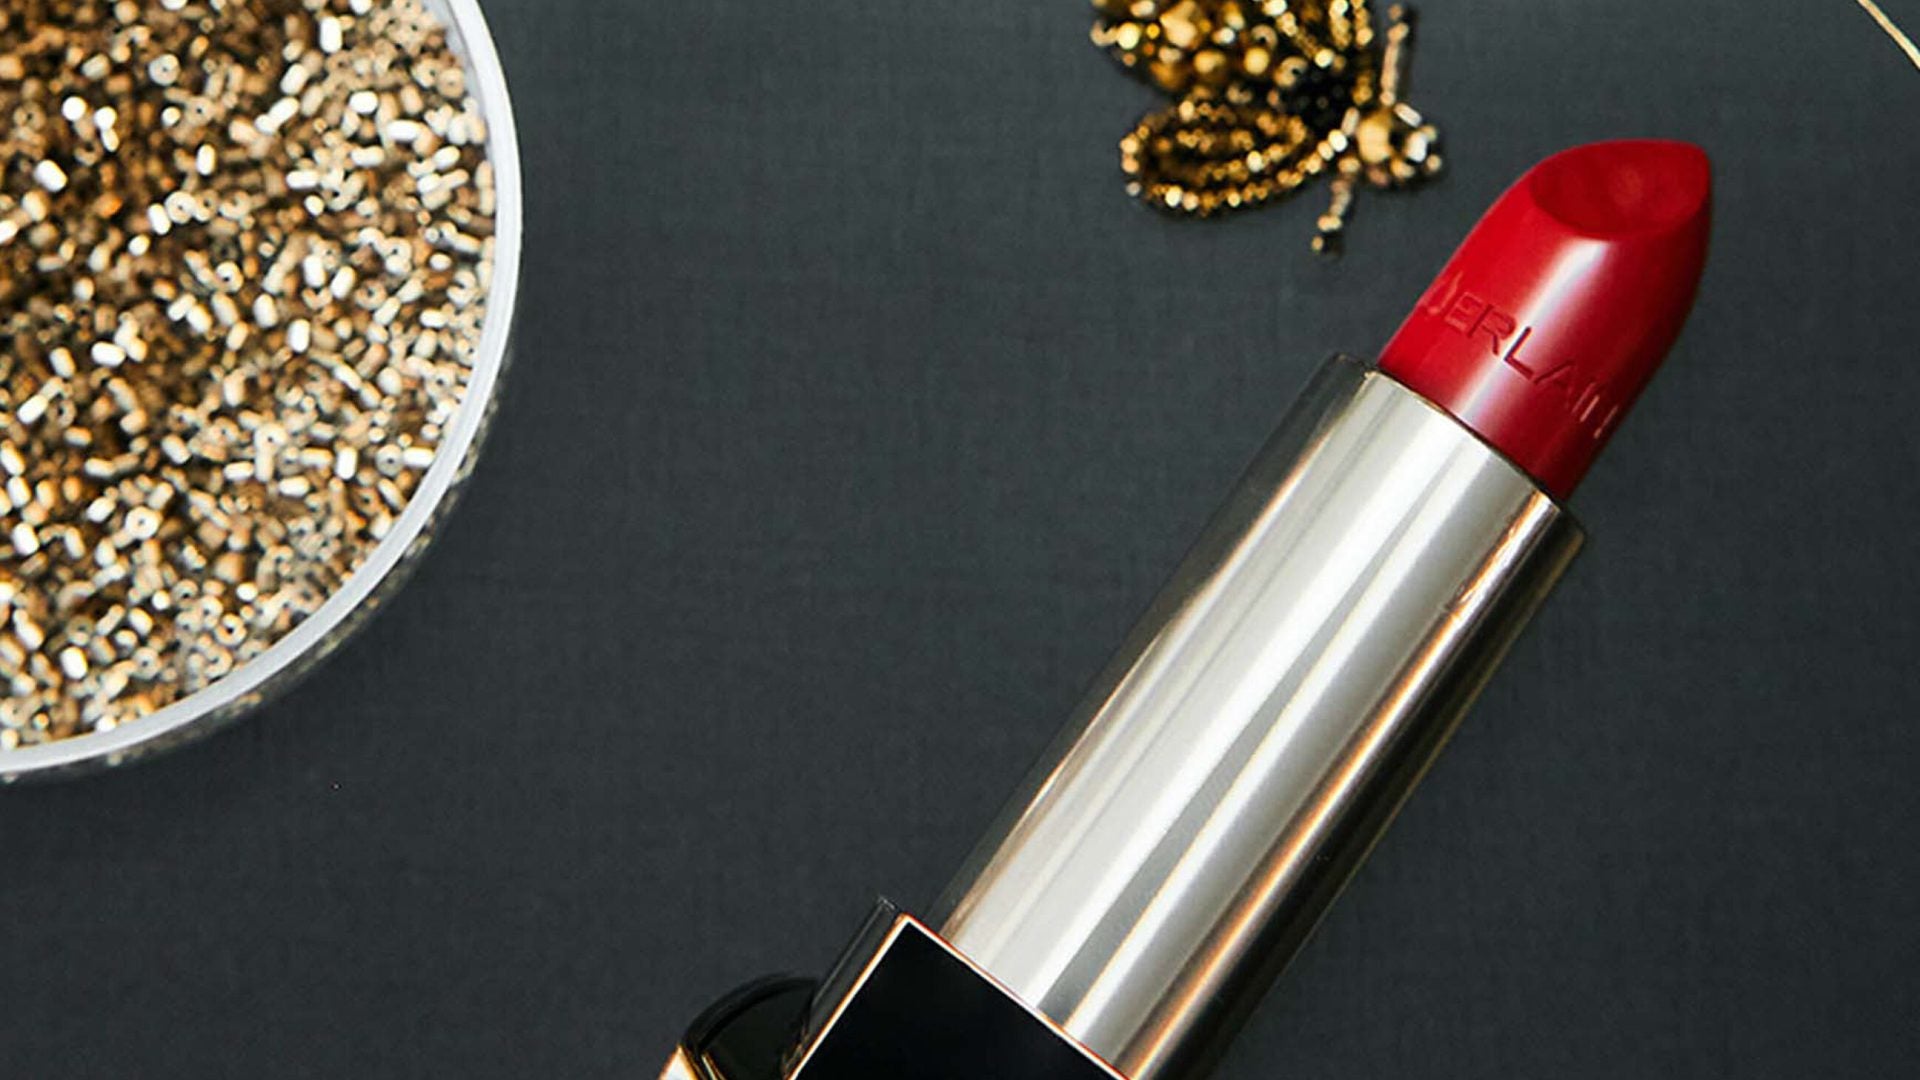 These Luxury Beauty Gifts Are Worth The Splurge